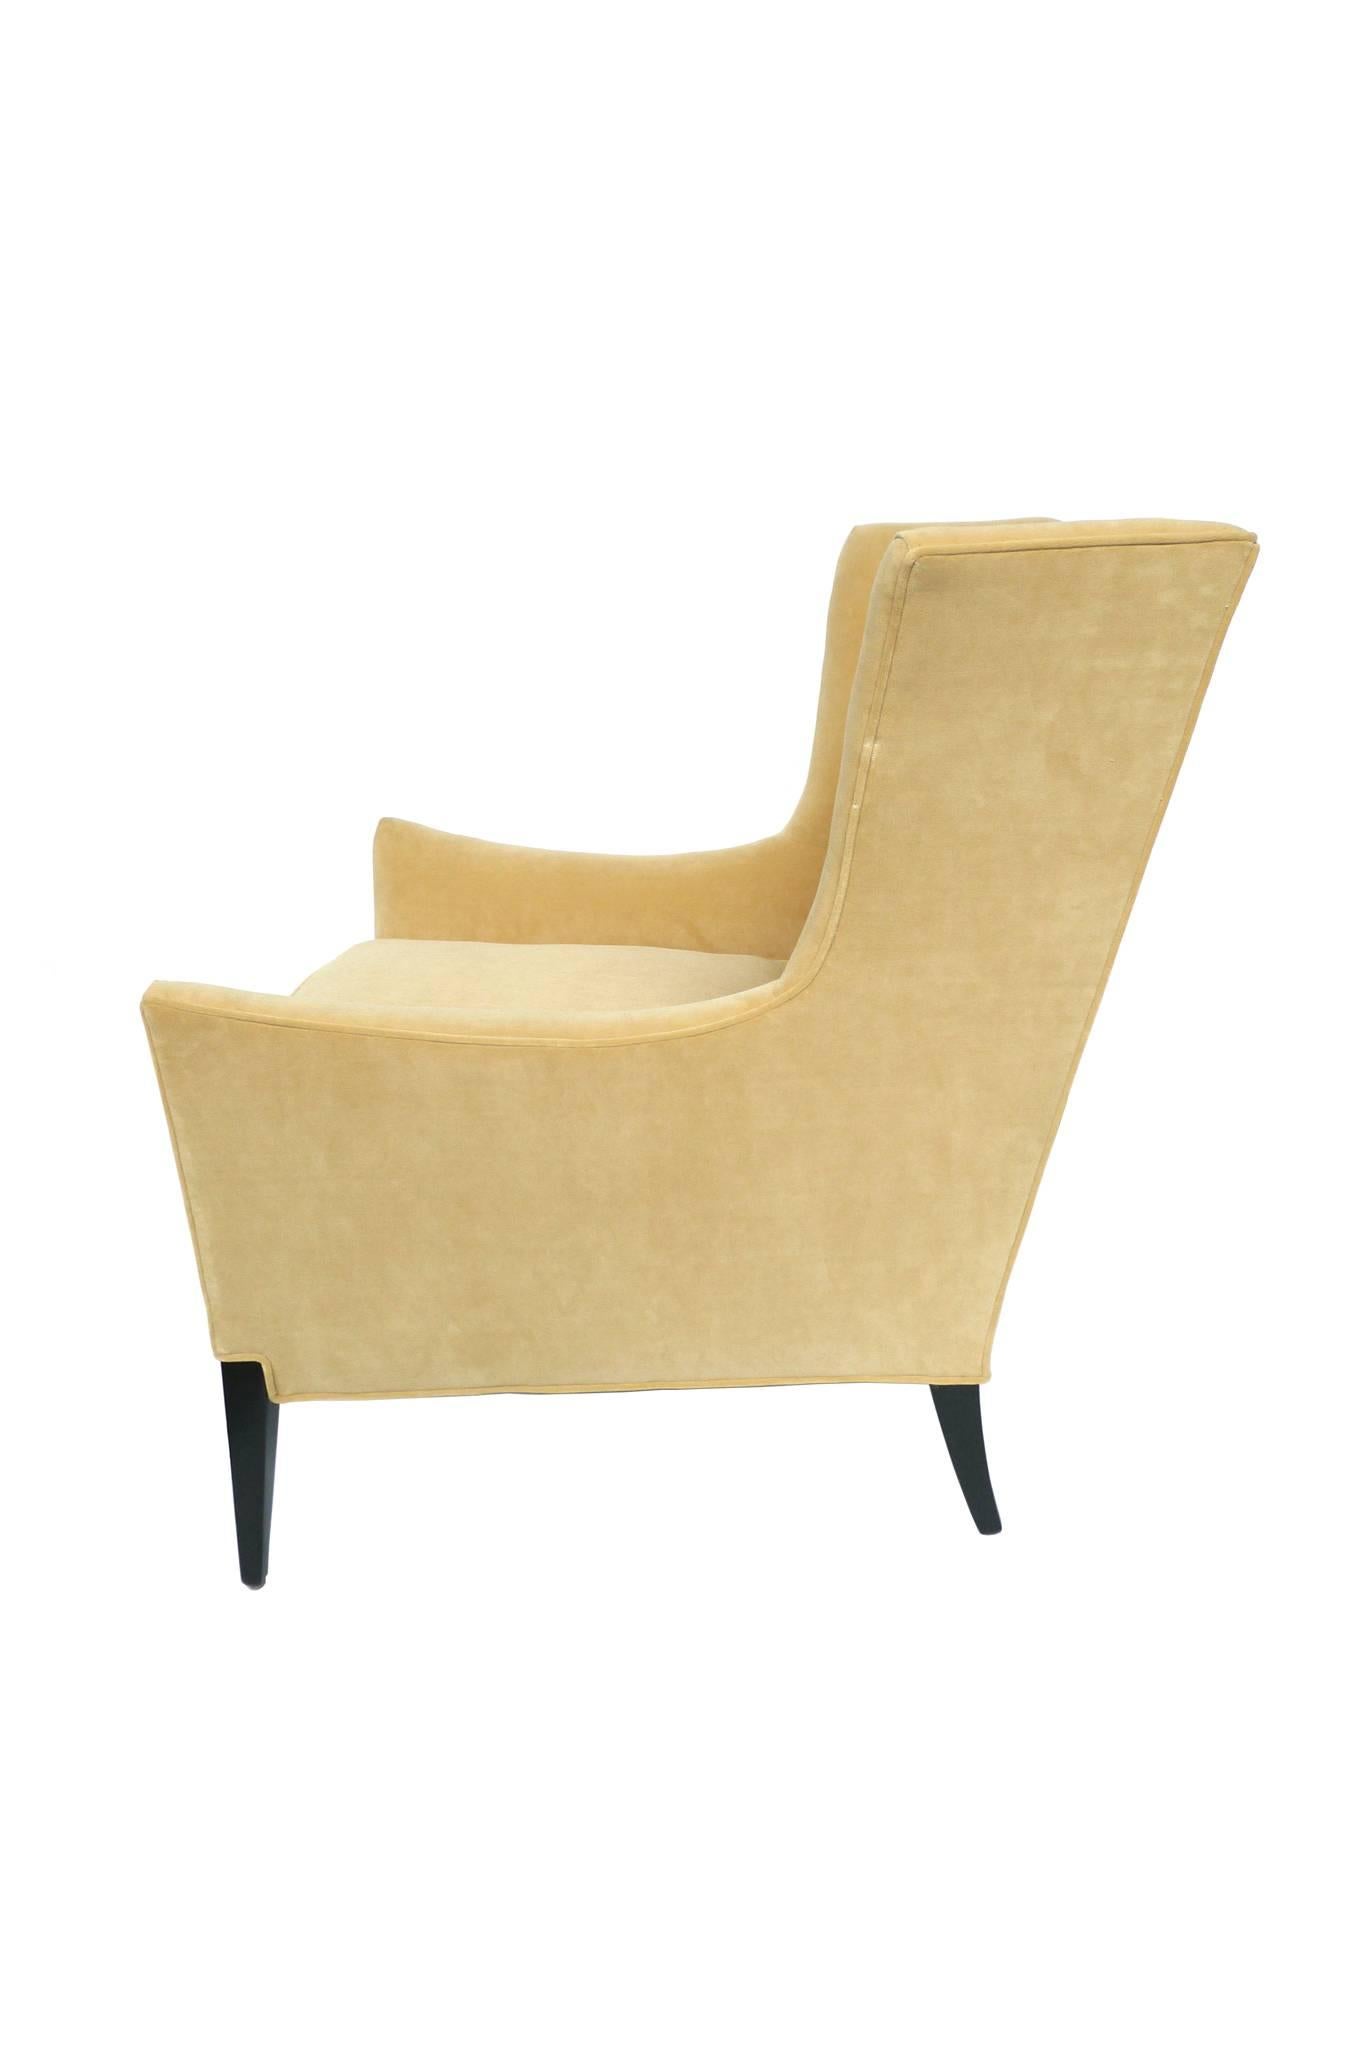 American Midcentury Wingback Armchair Attributed to James Mont